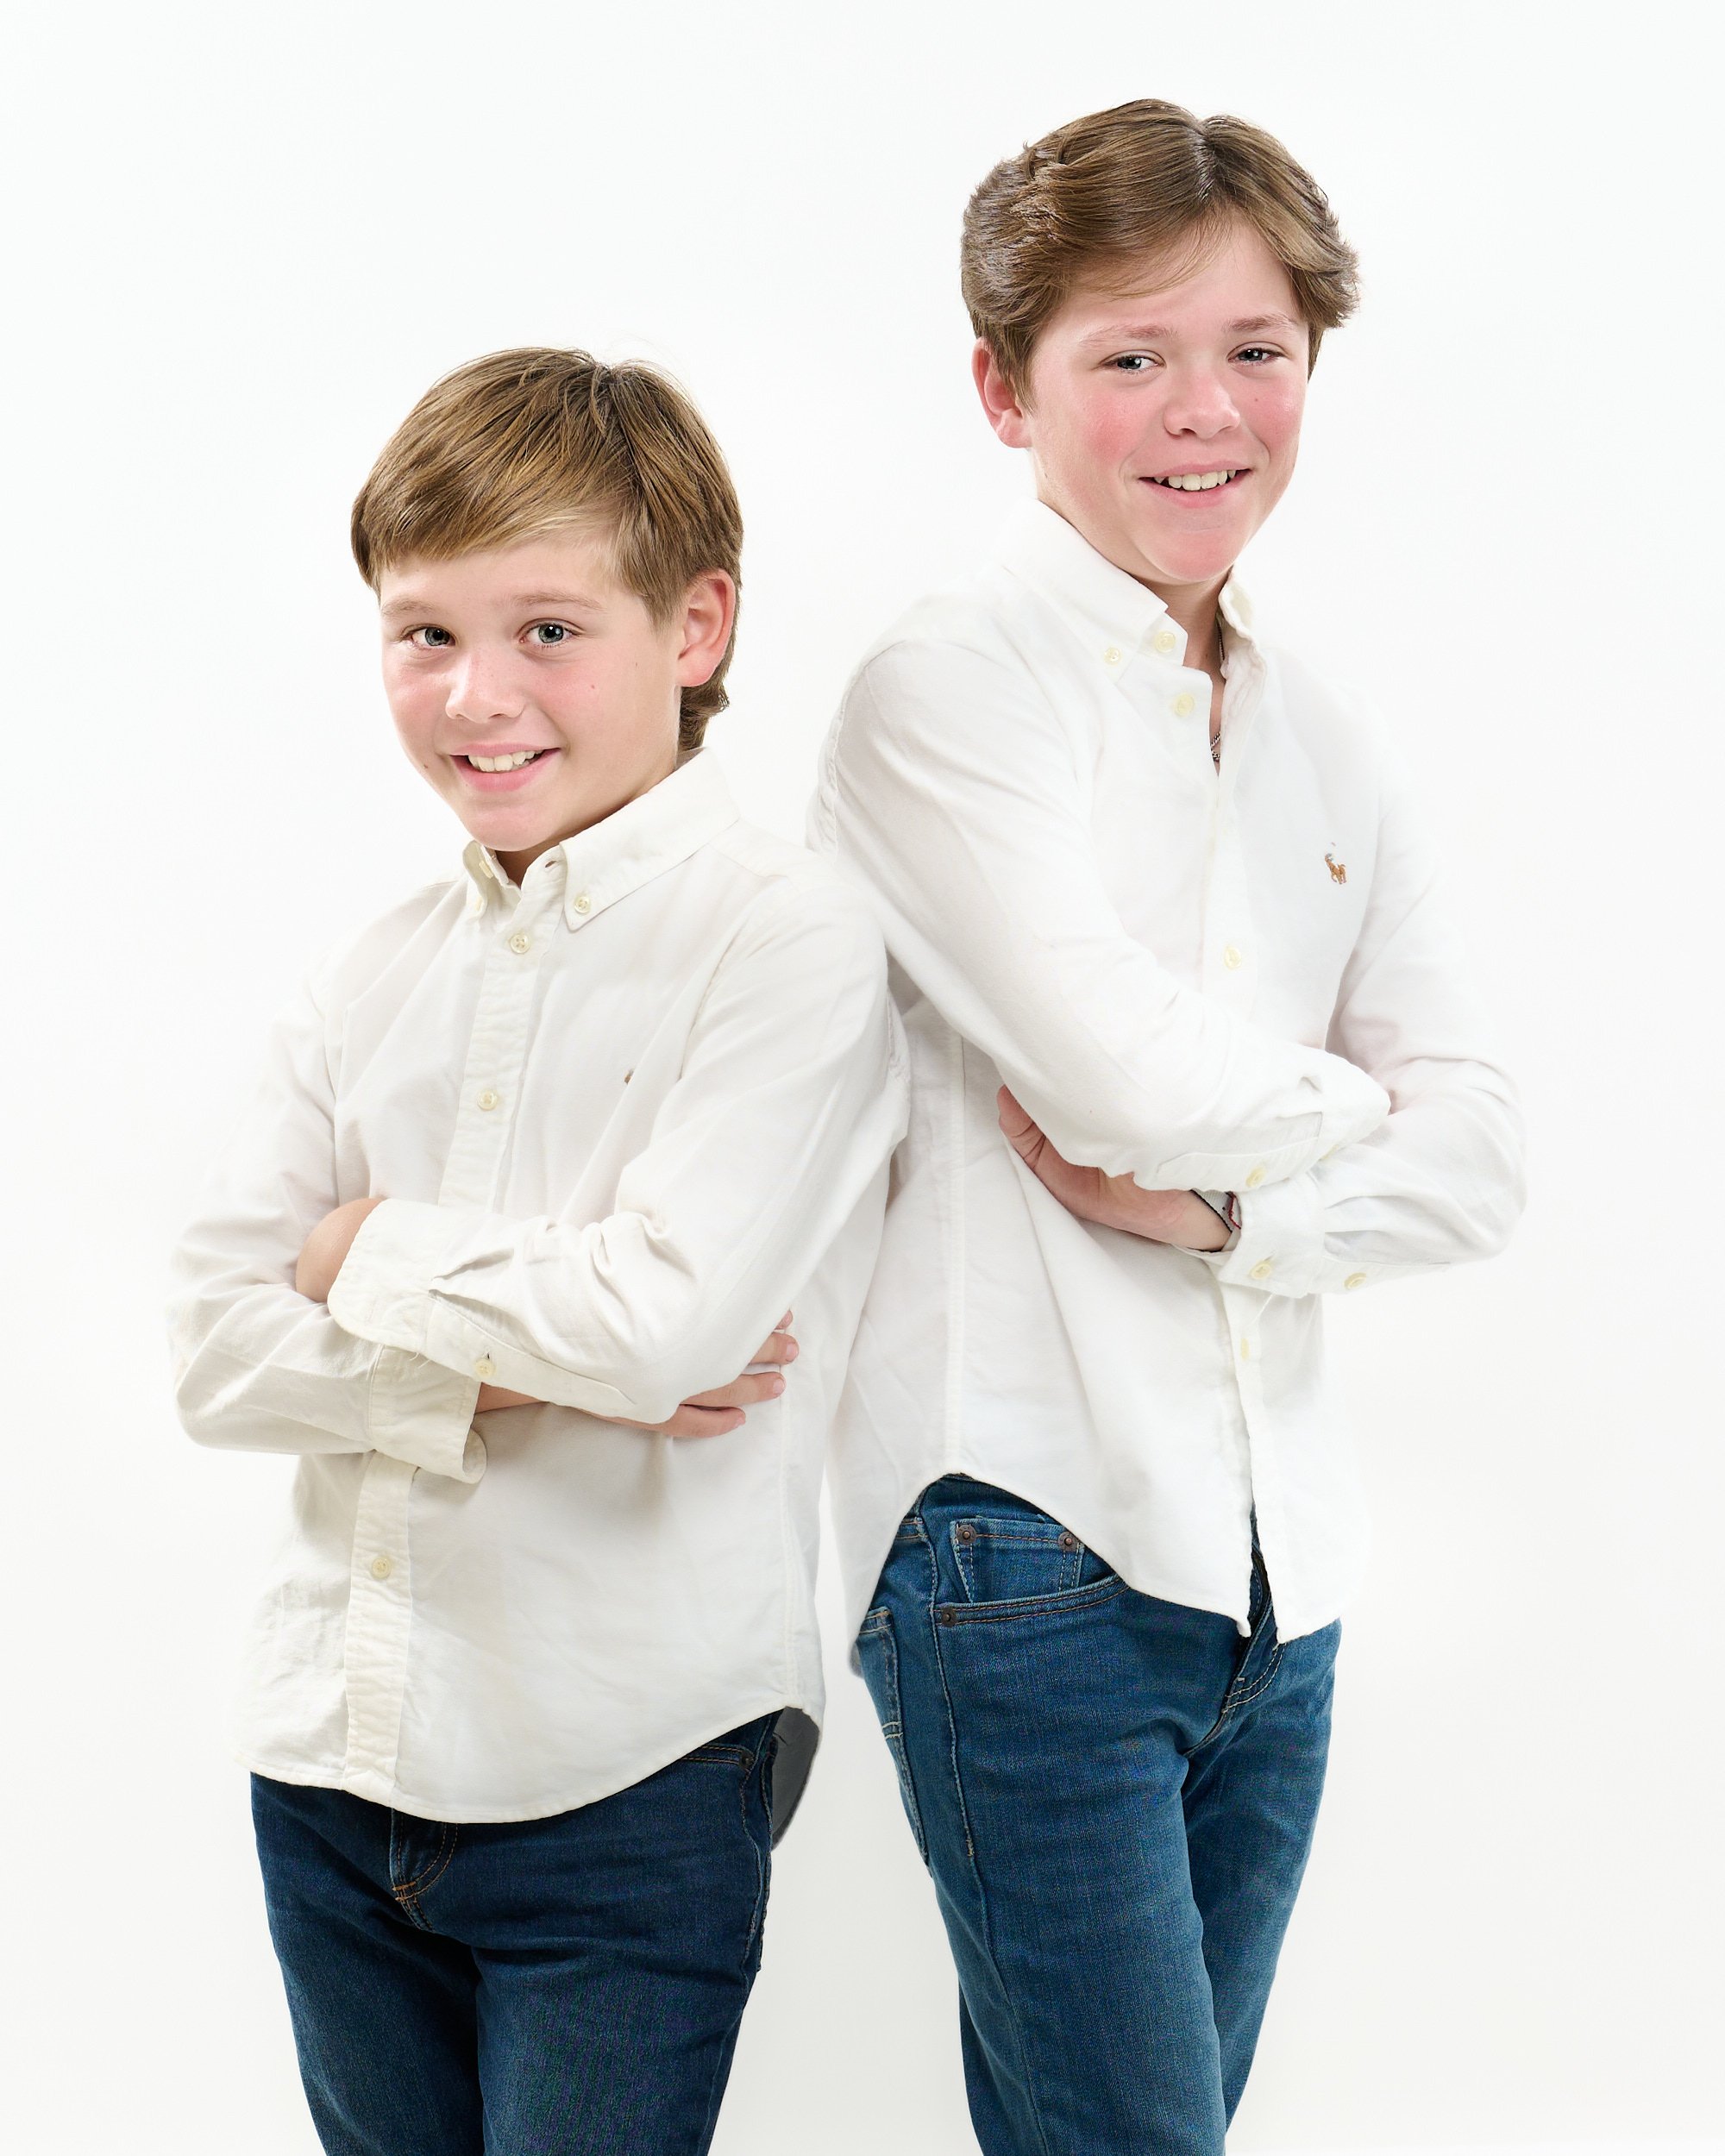  THE WOODLANDS, TEXAS - DECEMBER 2022: Emily Braud is posing for high key mono-color portraits with her husband and two sons. They wear white shirts and blue jeans and look happy and healthy. 